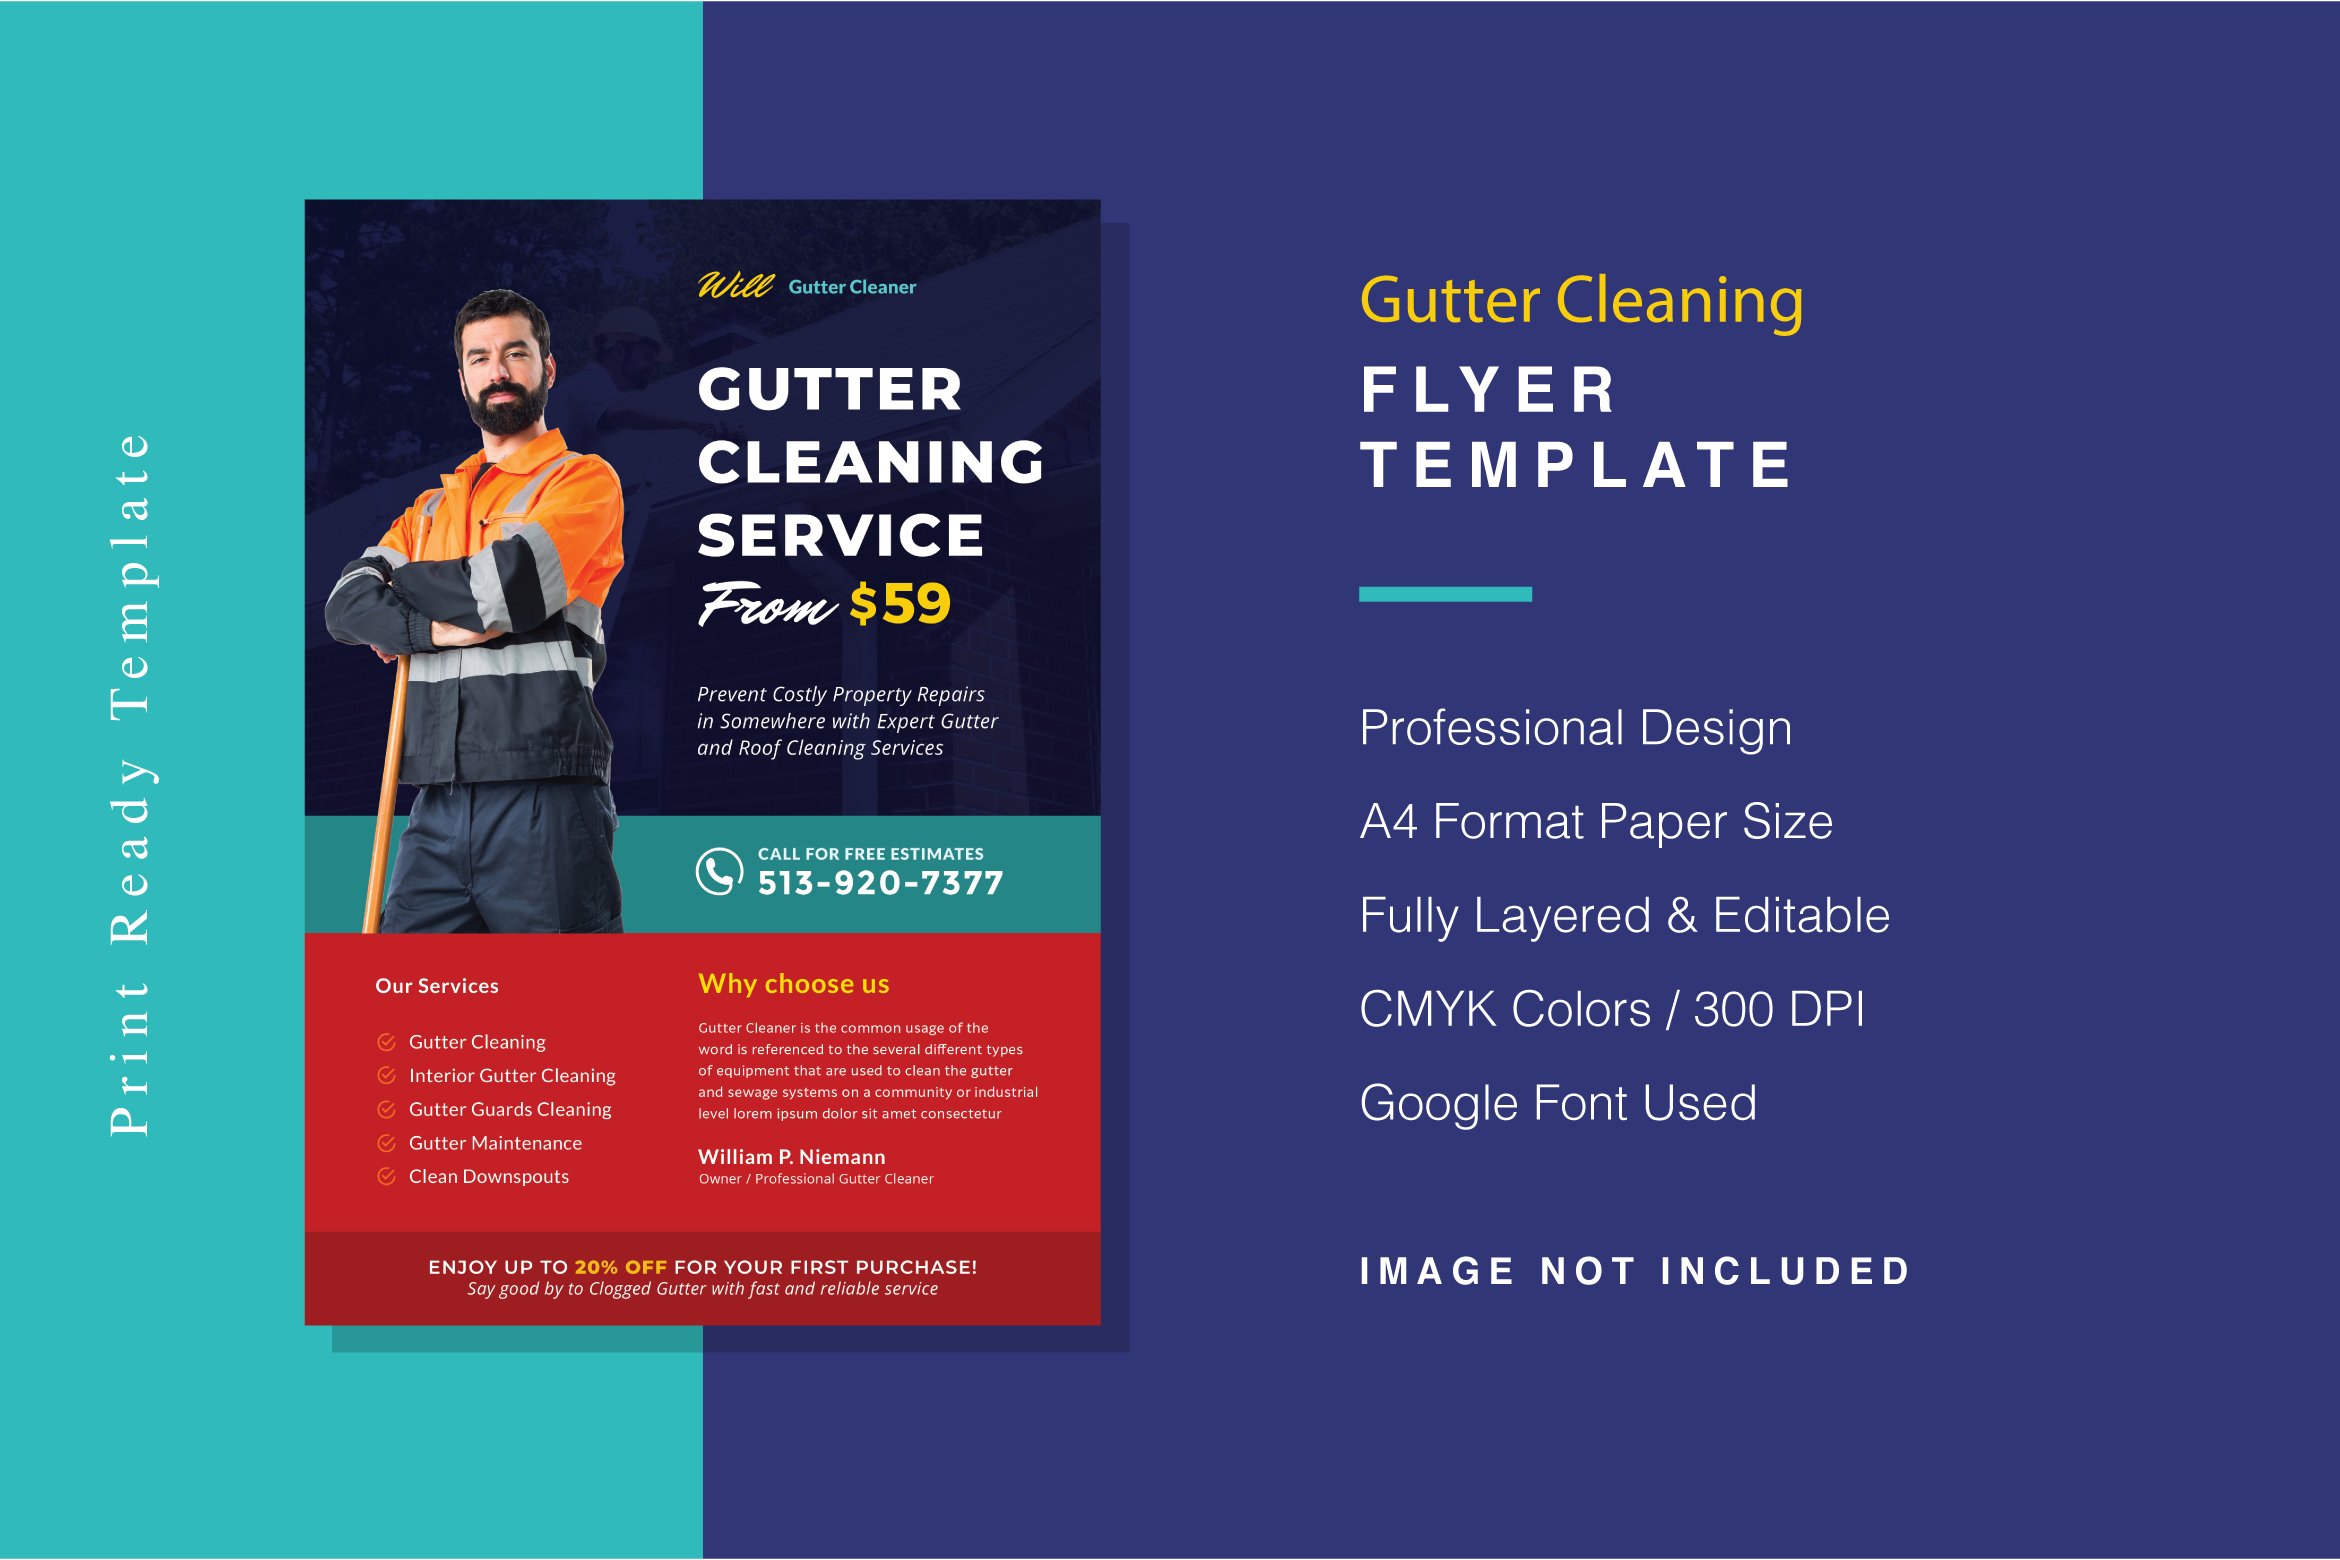 Gutter Cleaning Flyer Template cover image.